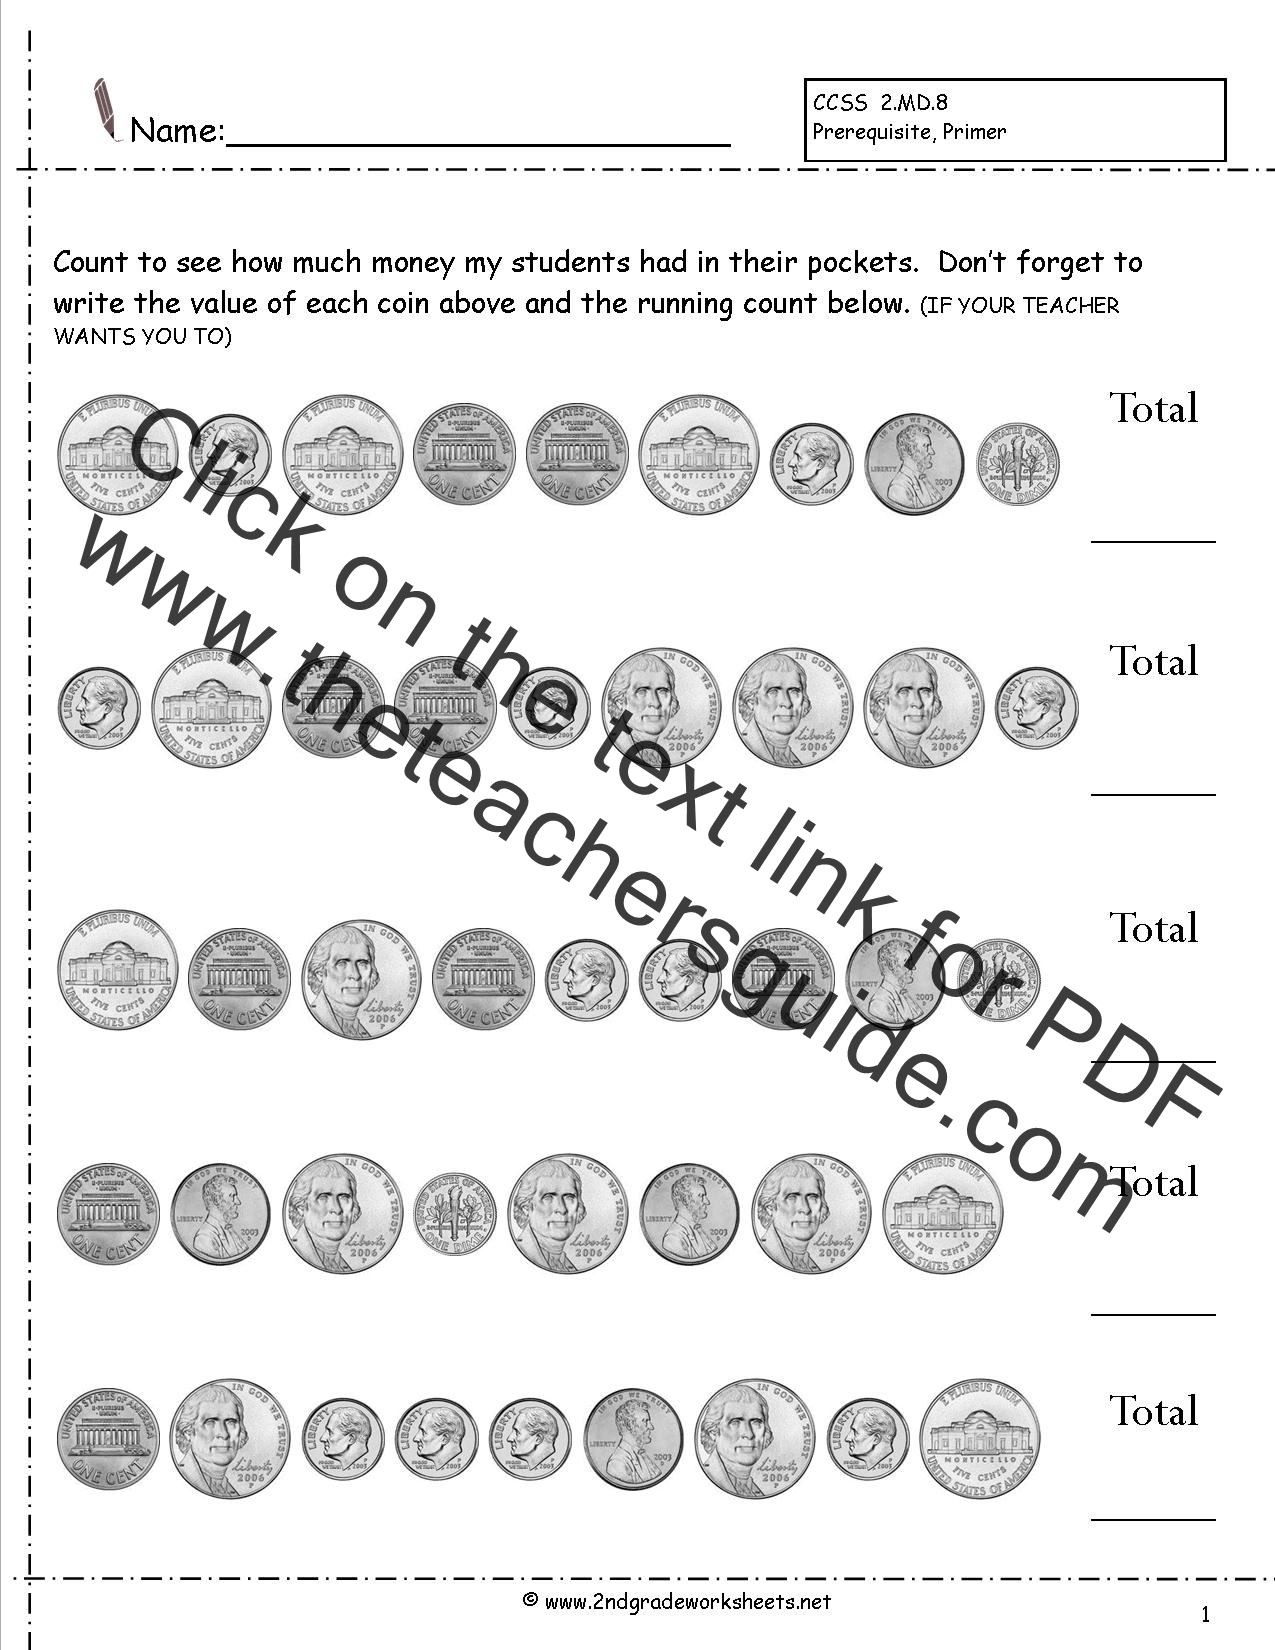 Counting Coins and Money Worksheets and Printouts